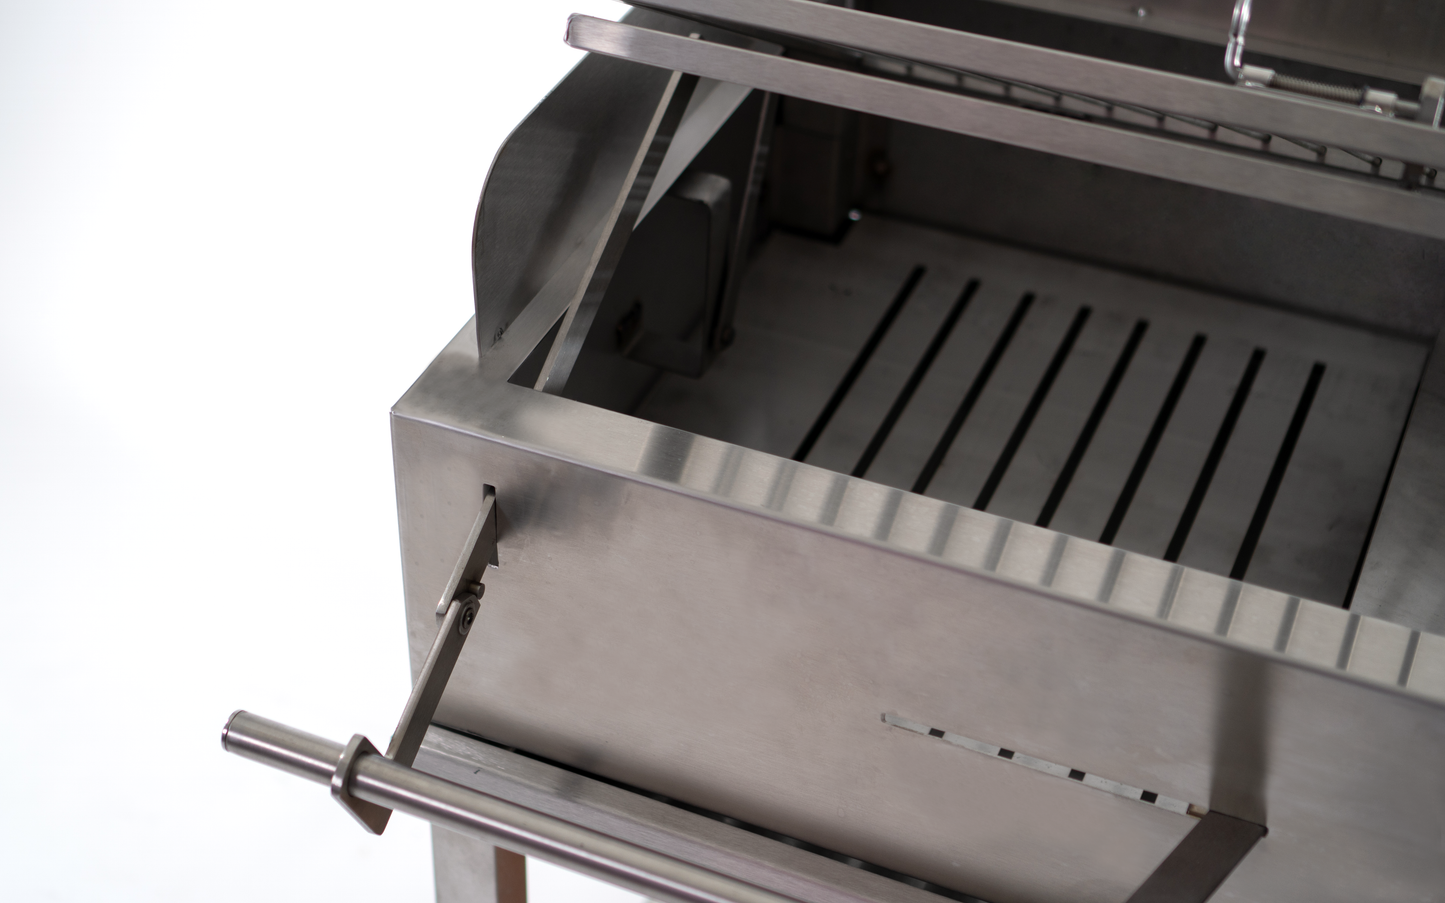 The Flip Grill